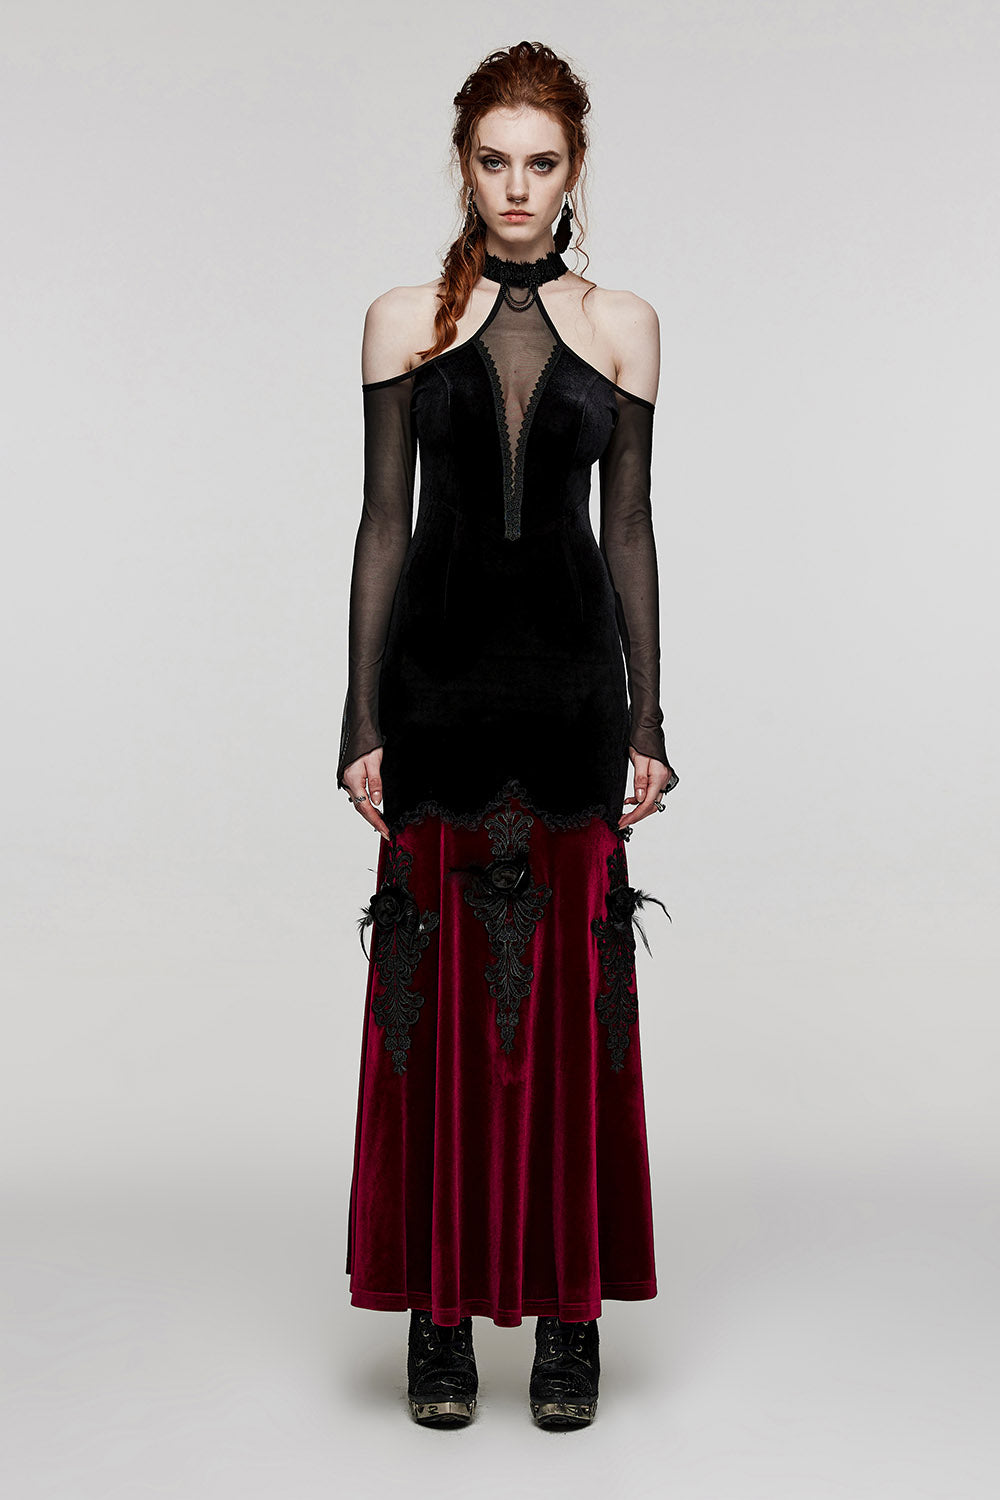 womens gothic vintage inspired dress